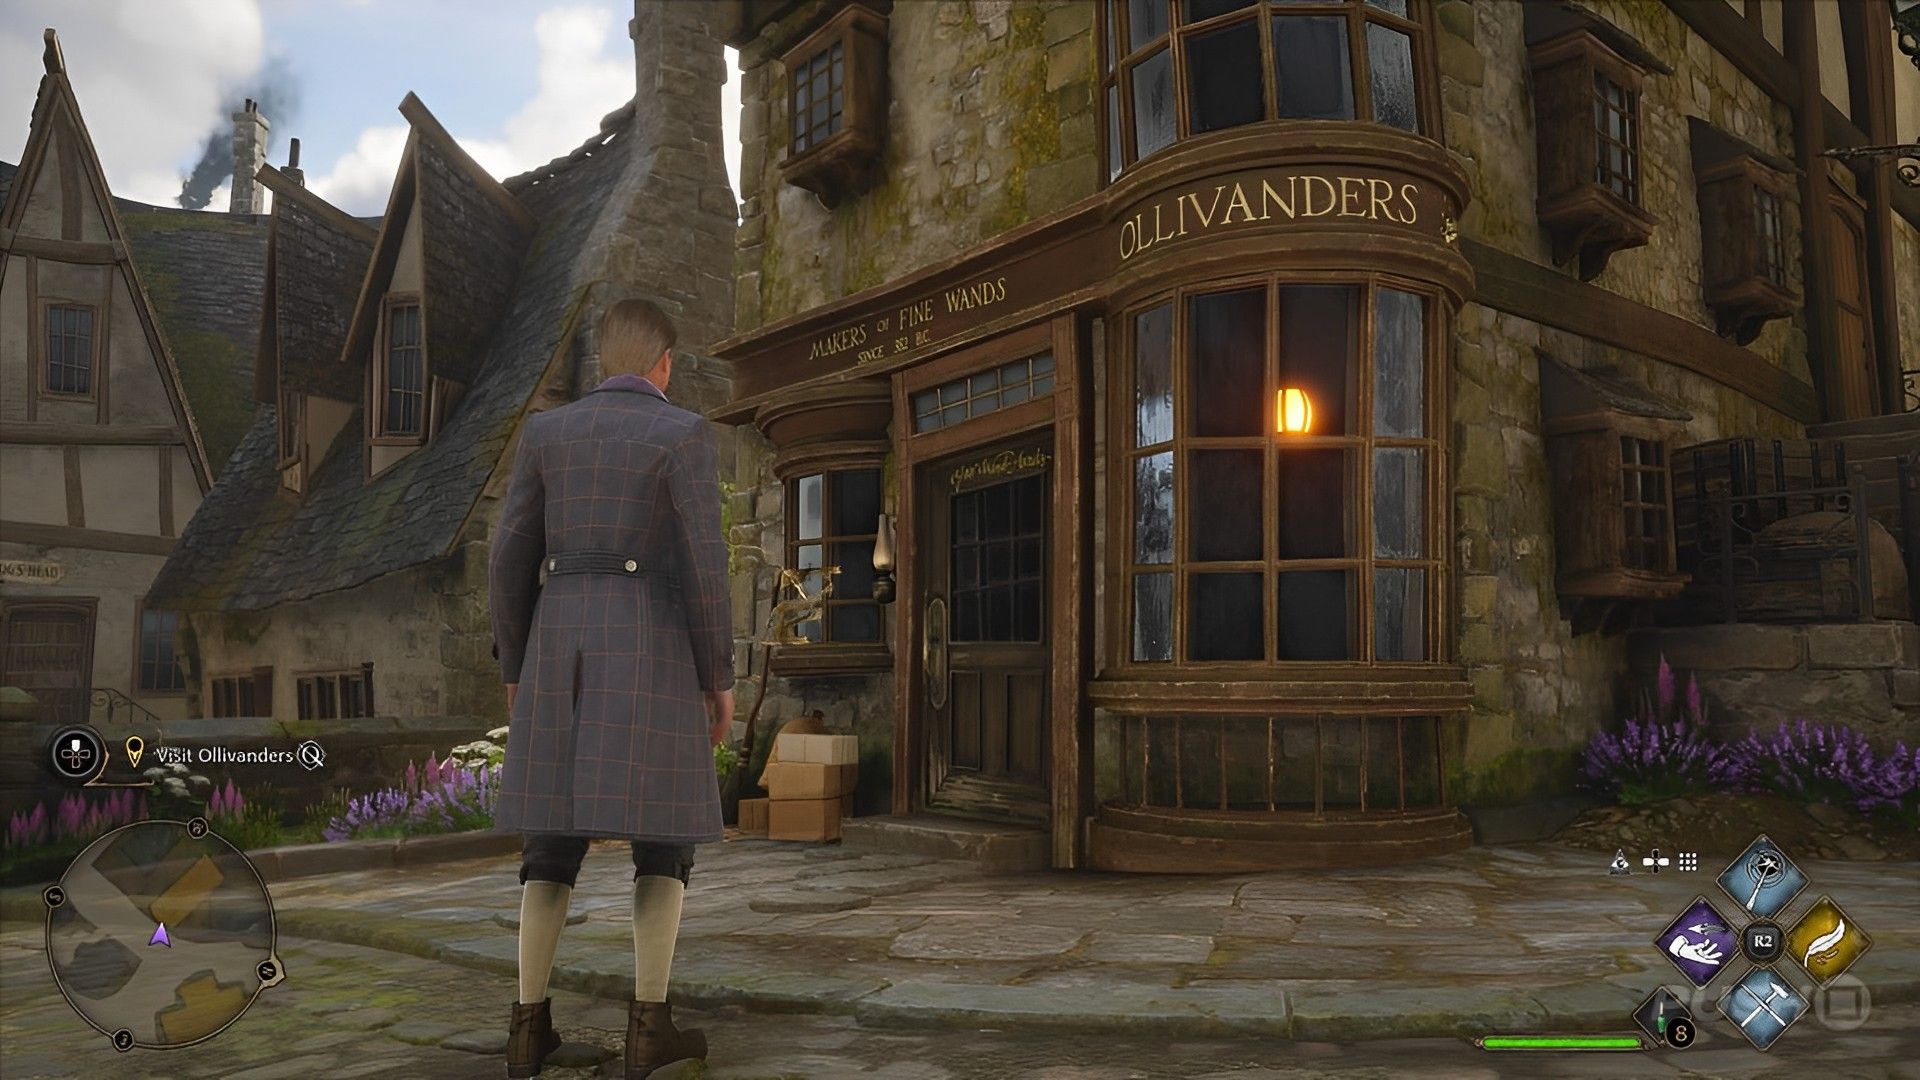 As a side quest, you'll go to Ollivanders for your first personal wand